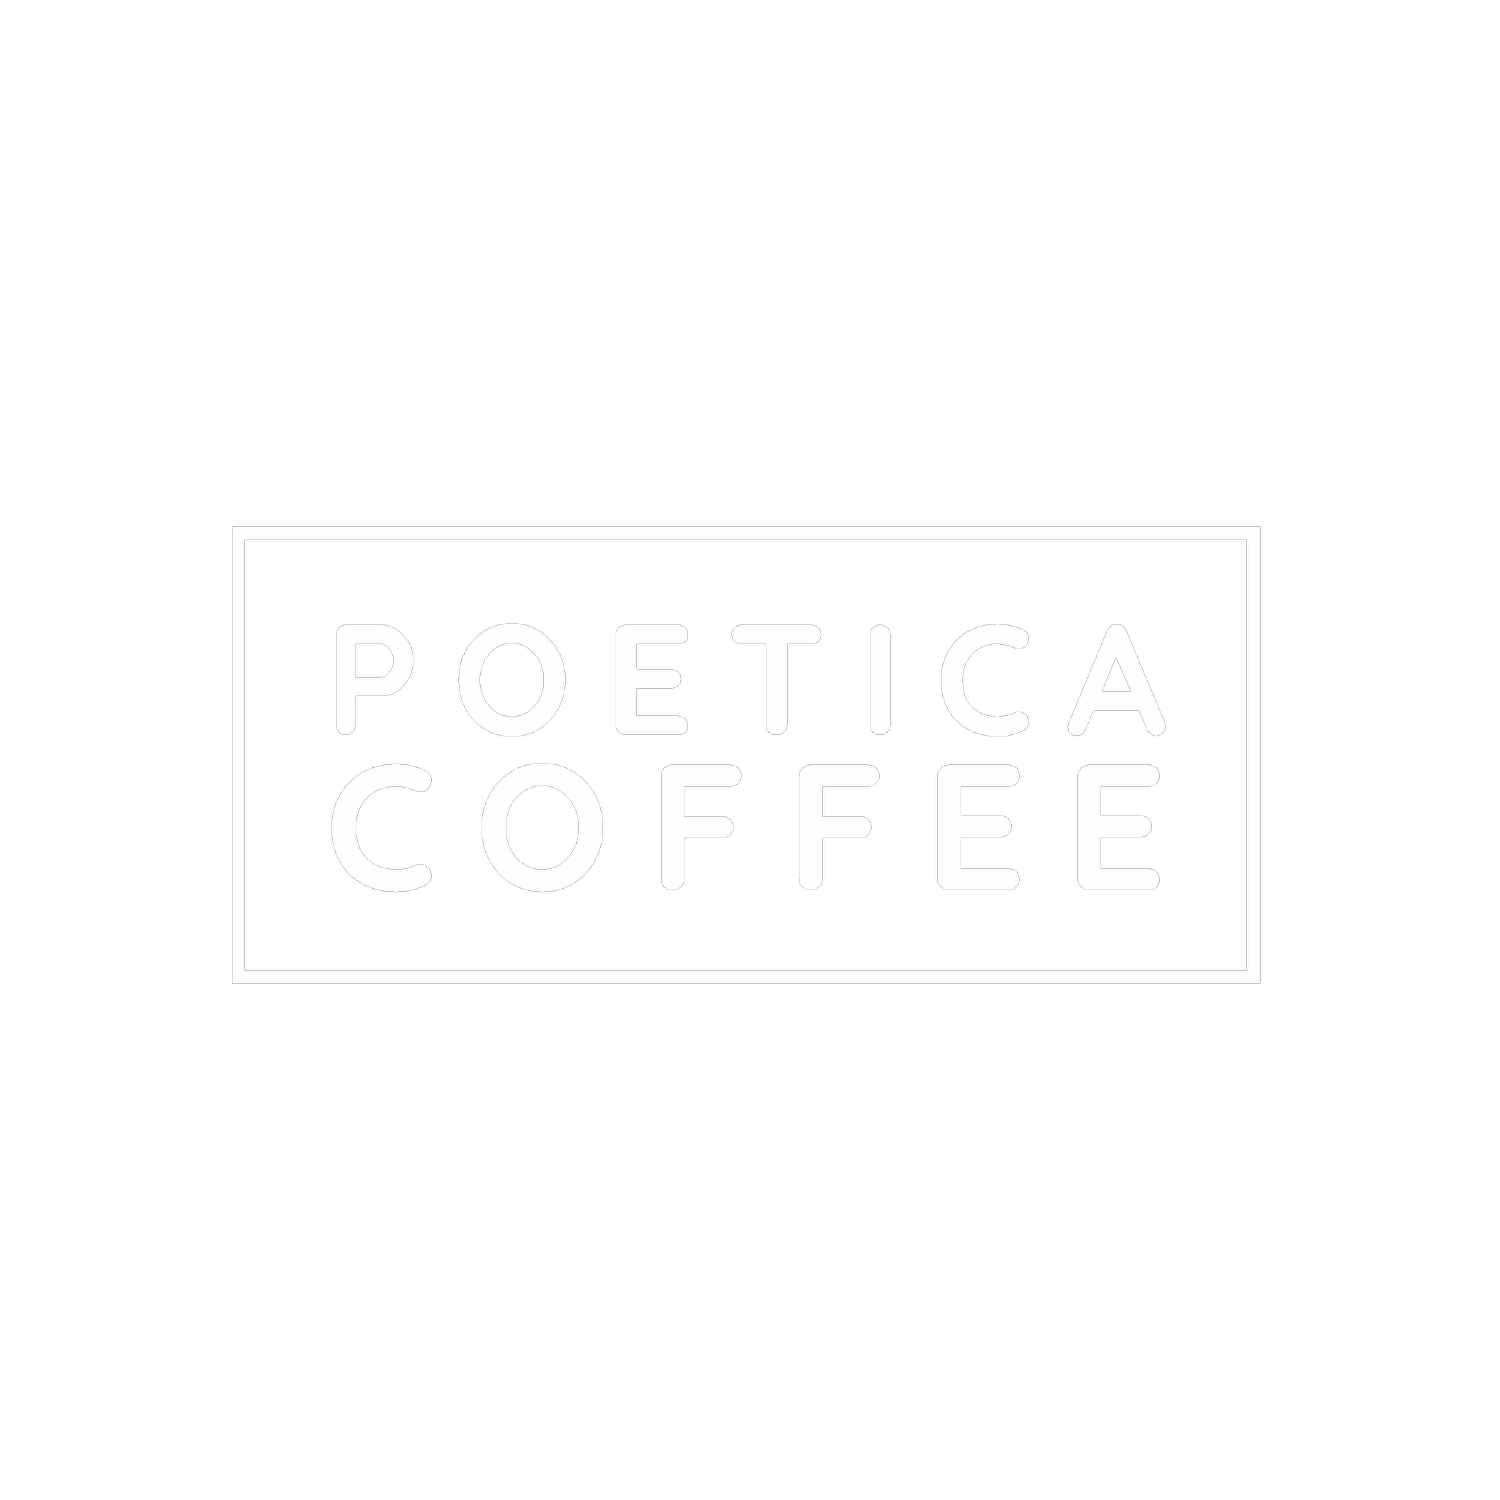 Poetry of Coffee